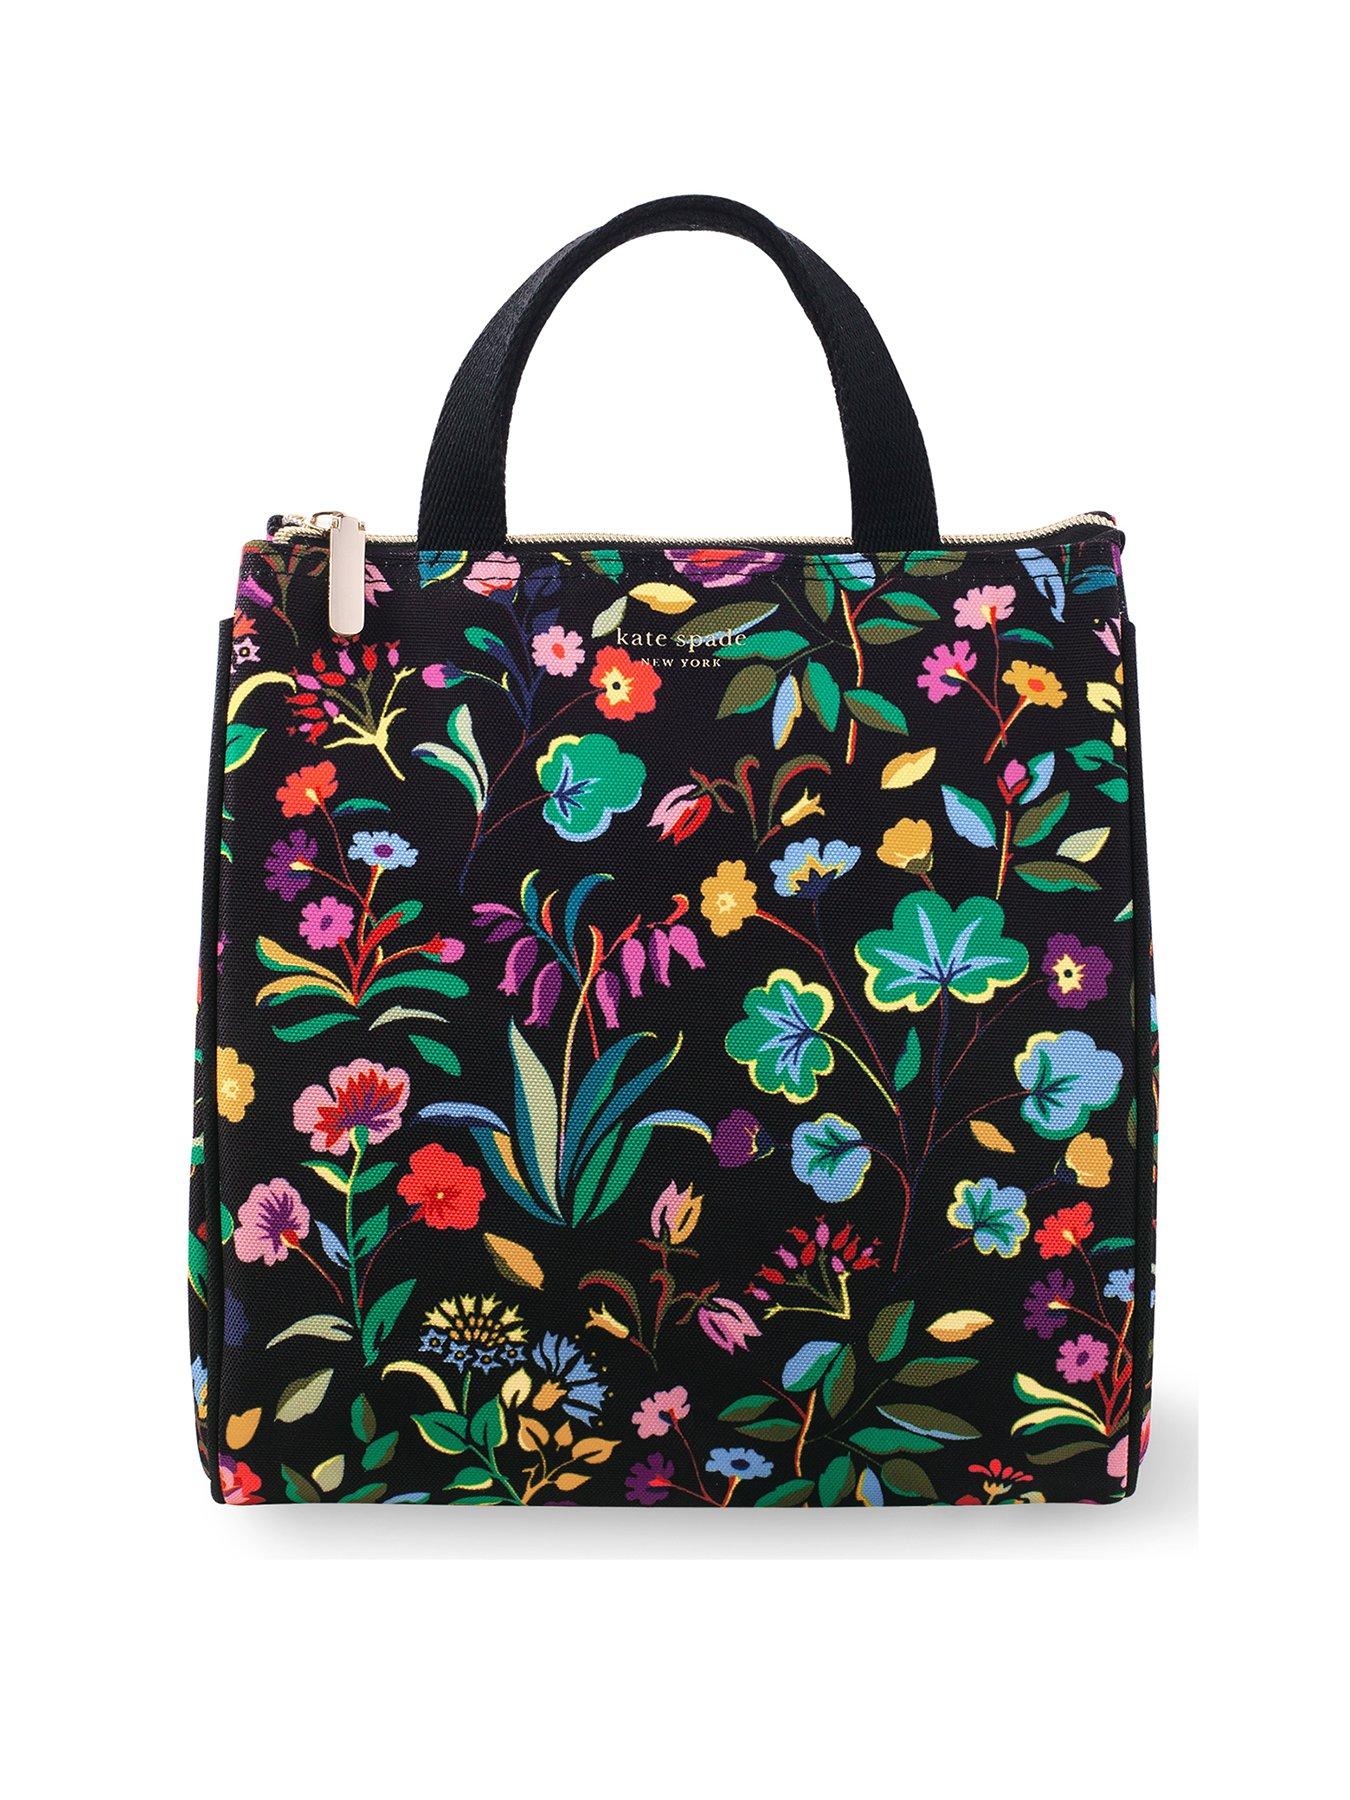 Kate Spade New York Lunch Bag, Autumn Floral 